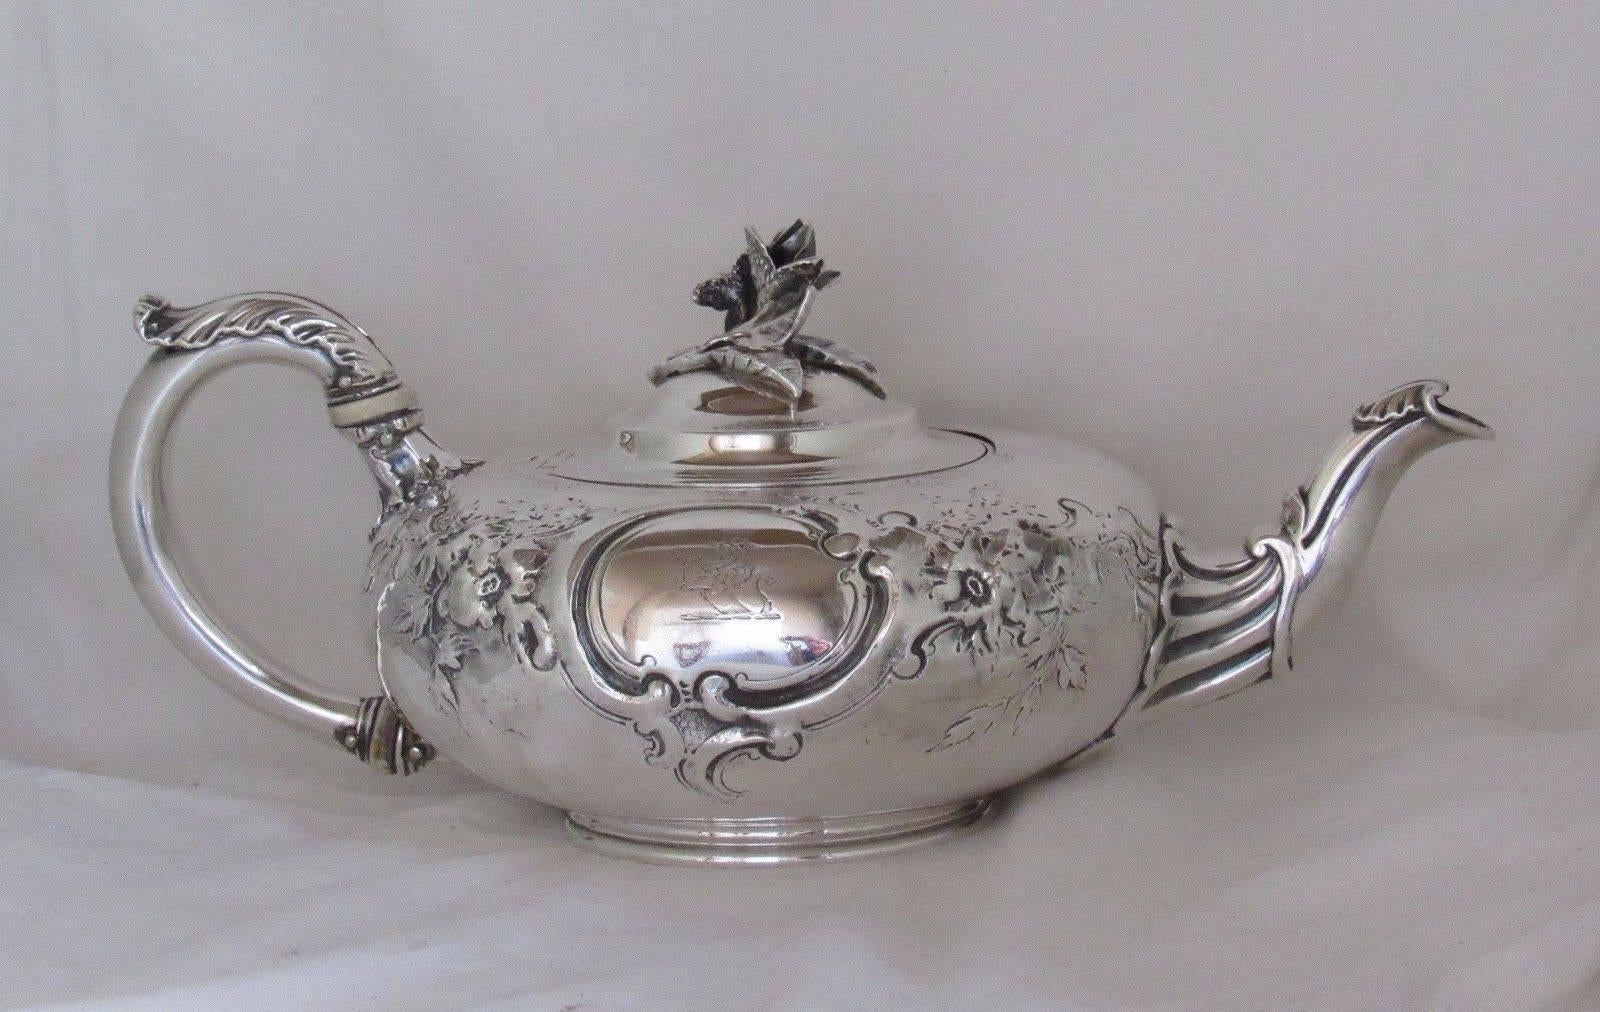 Gorgeous Paul Storr English sterling silver teapot.

William IV, London 1831 date mark, PS maker's mark, and marked Storr & Mortimer. Fully marked on bottom, marked under lid, and on handle.

Floral repousse with engraved lion and sword crest.